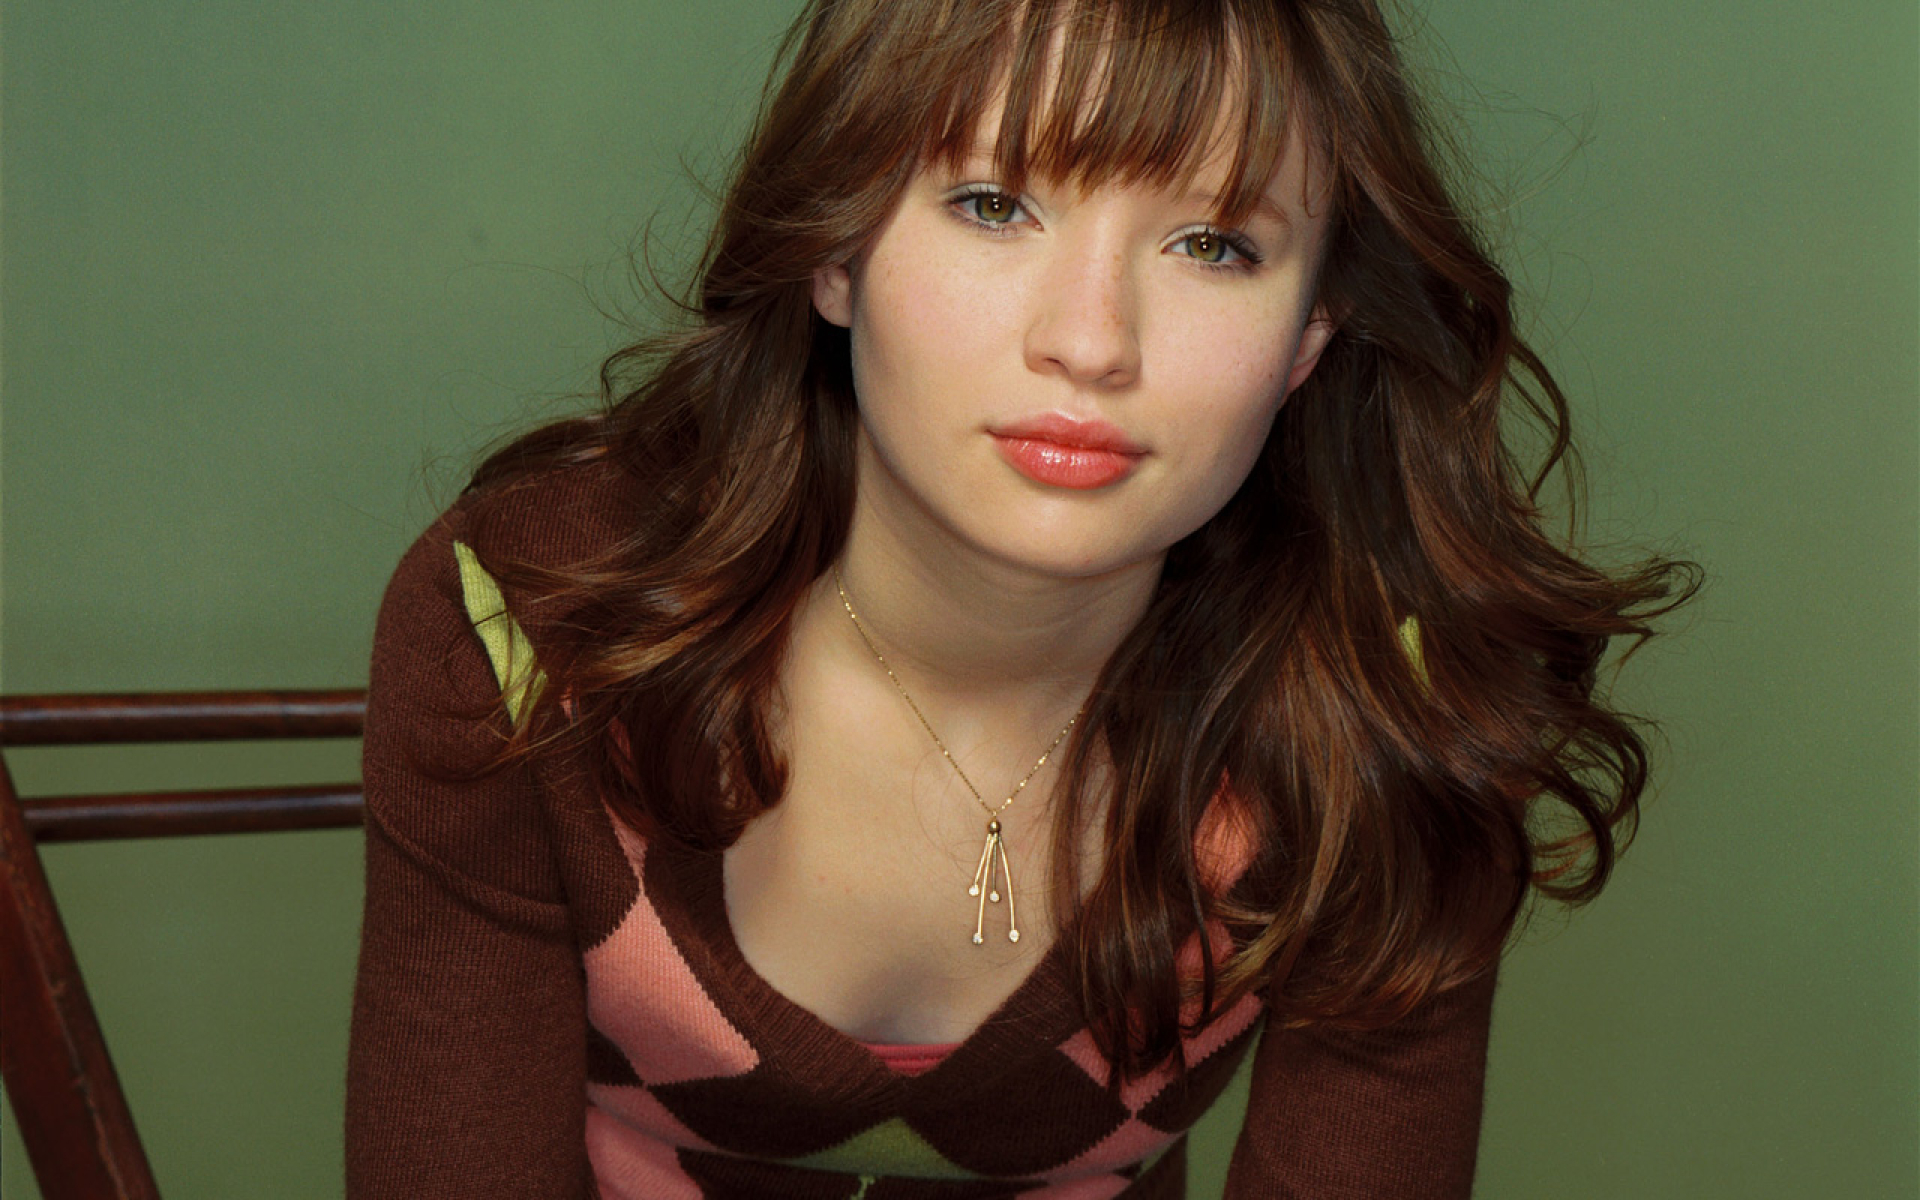 1920x1200 Resolution Emily Browning Hot Images 1200p Wallpaper Wallpapers Den